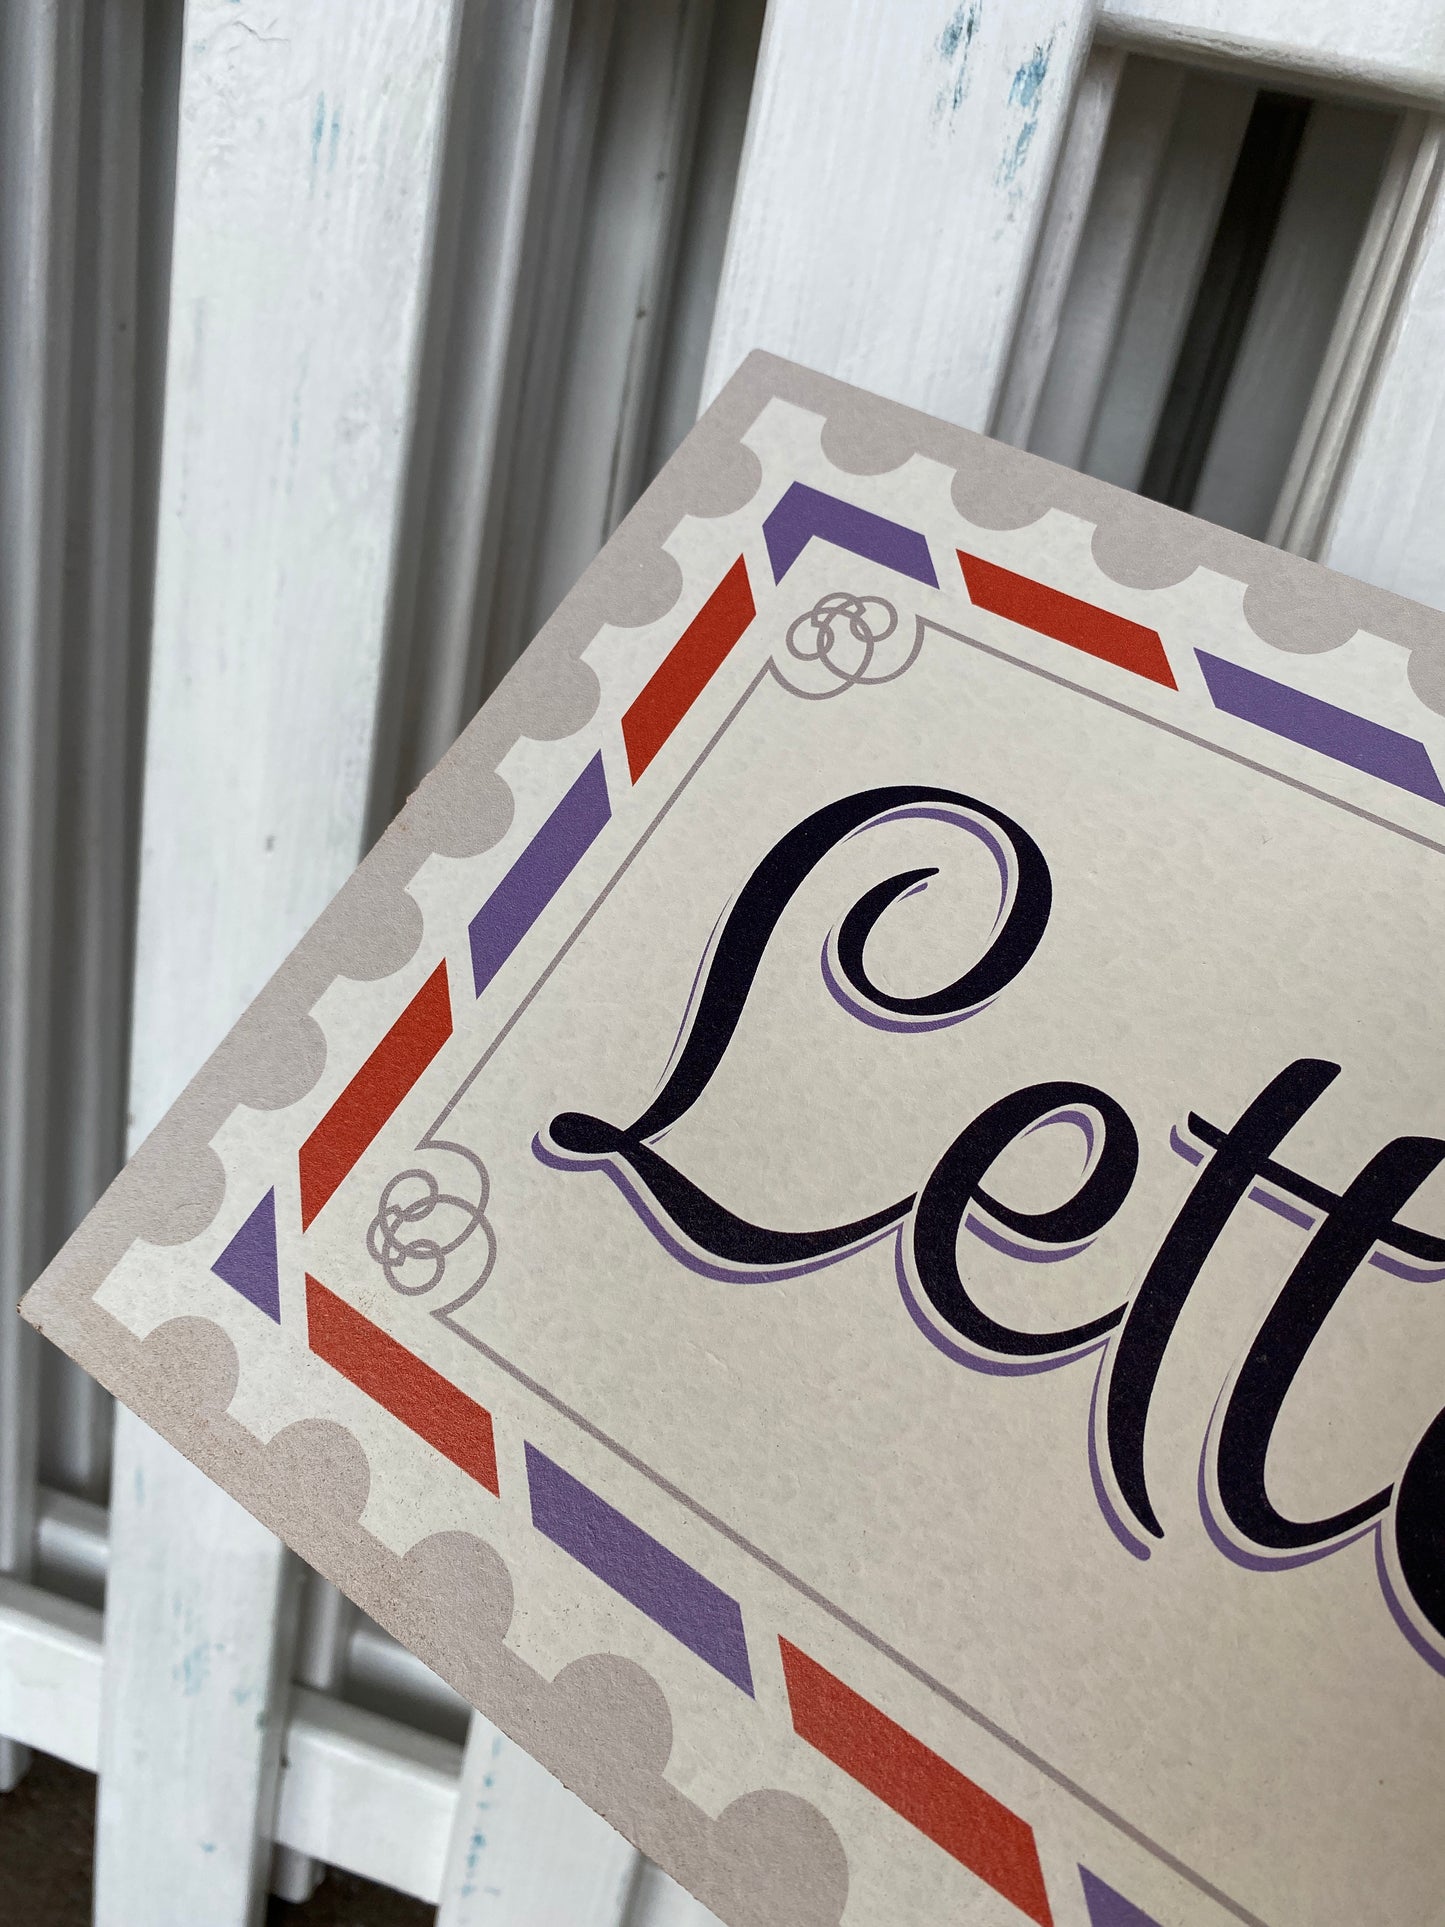 Letters To Santa Sign